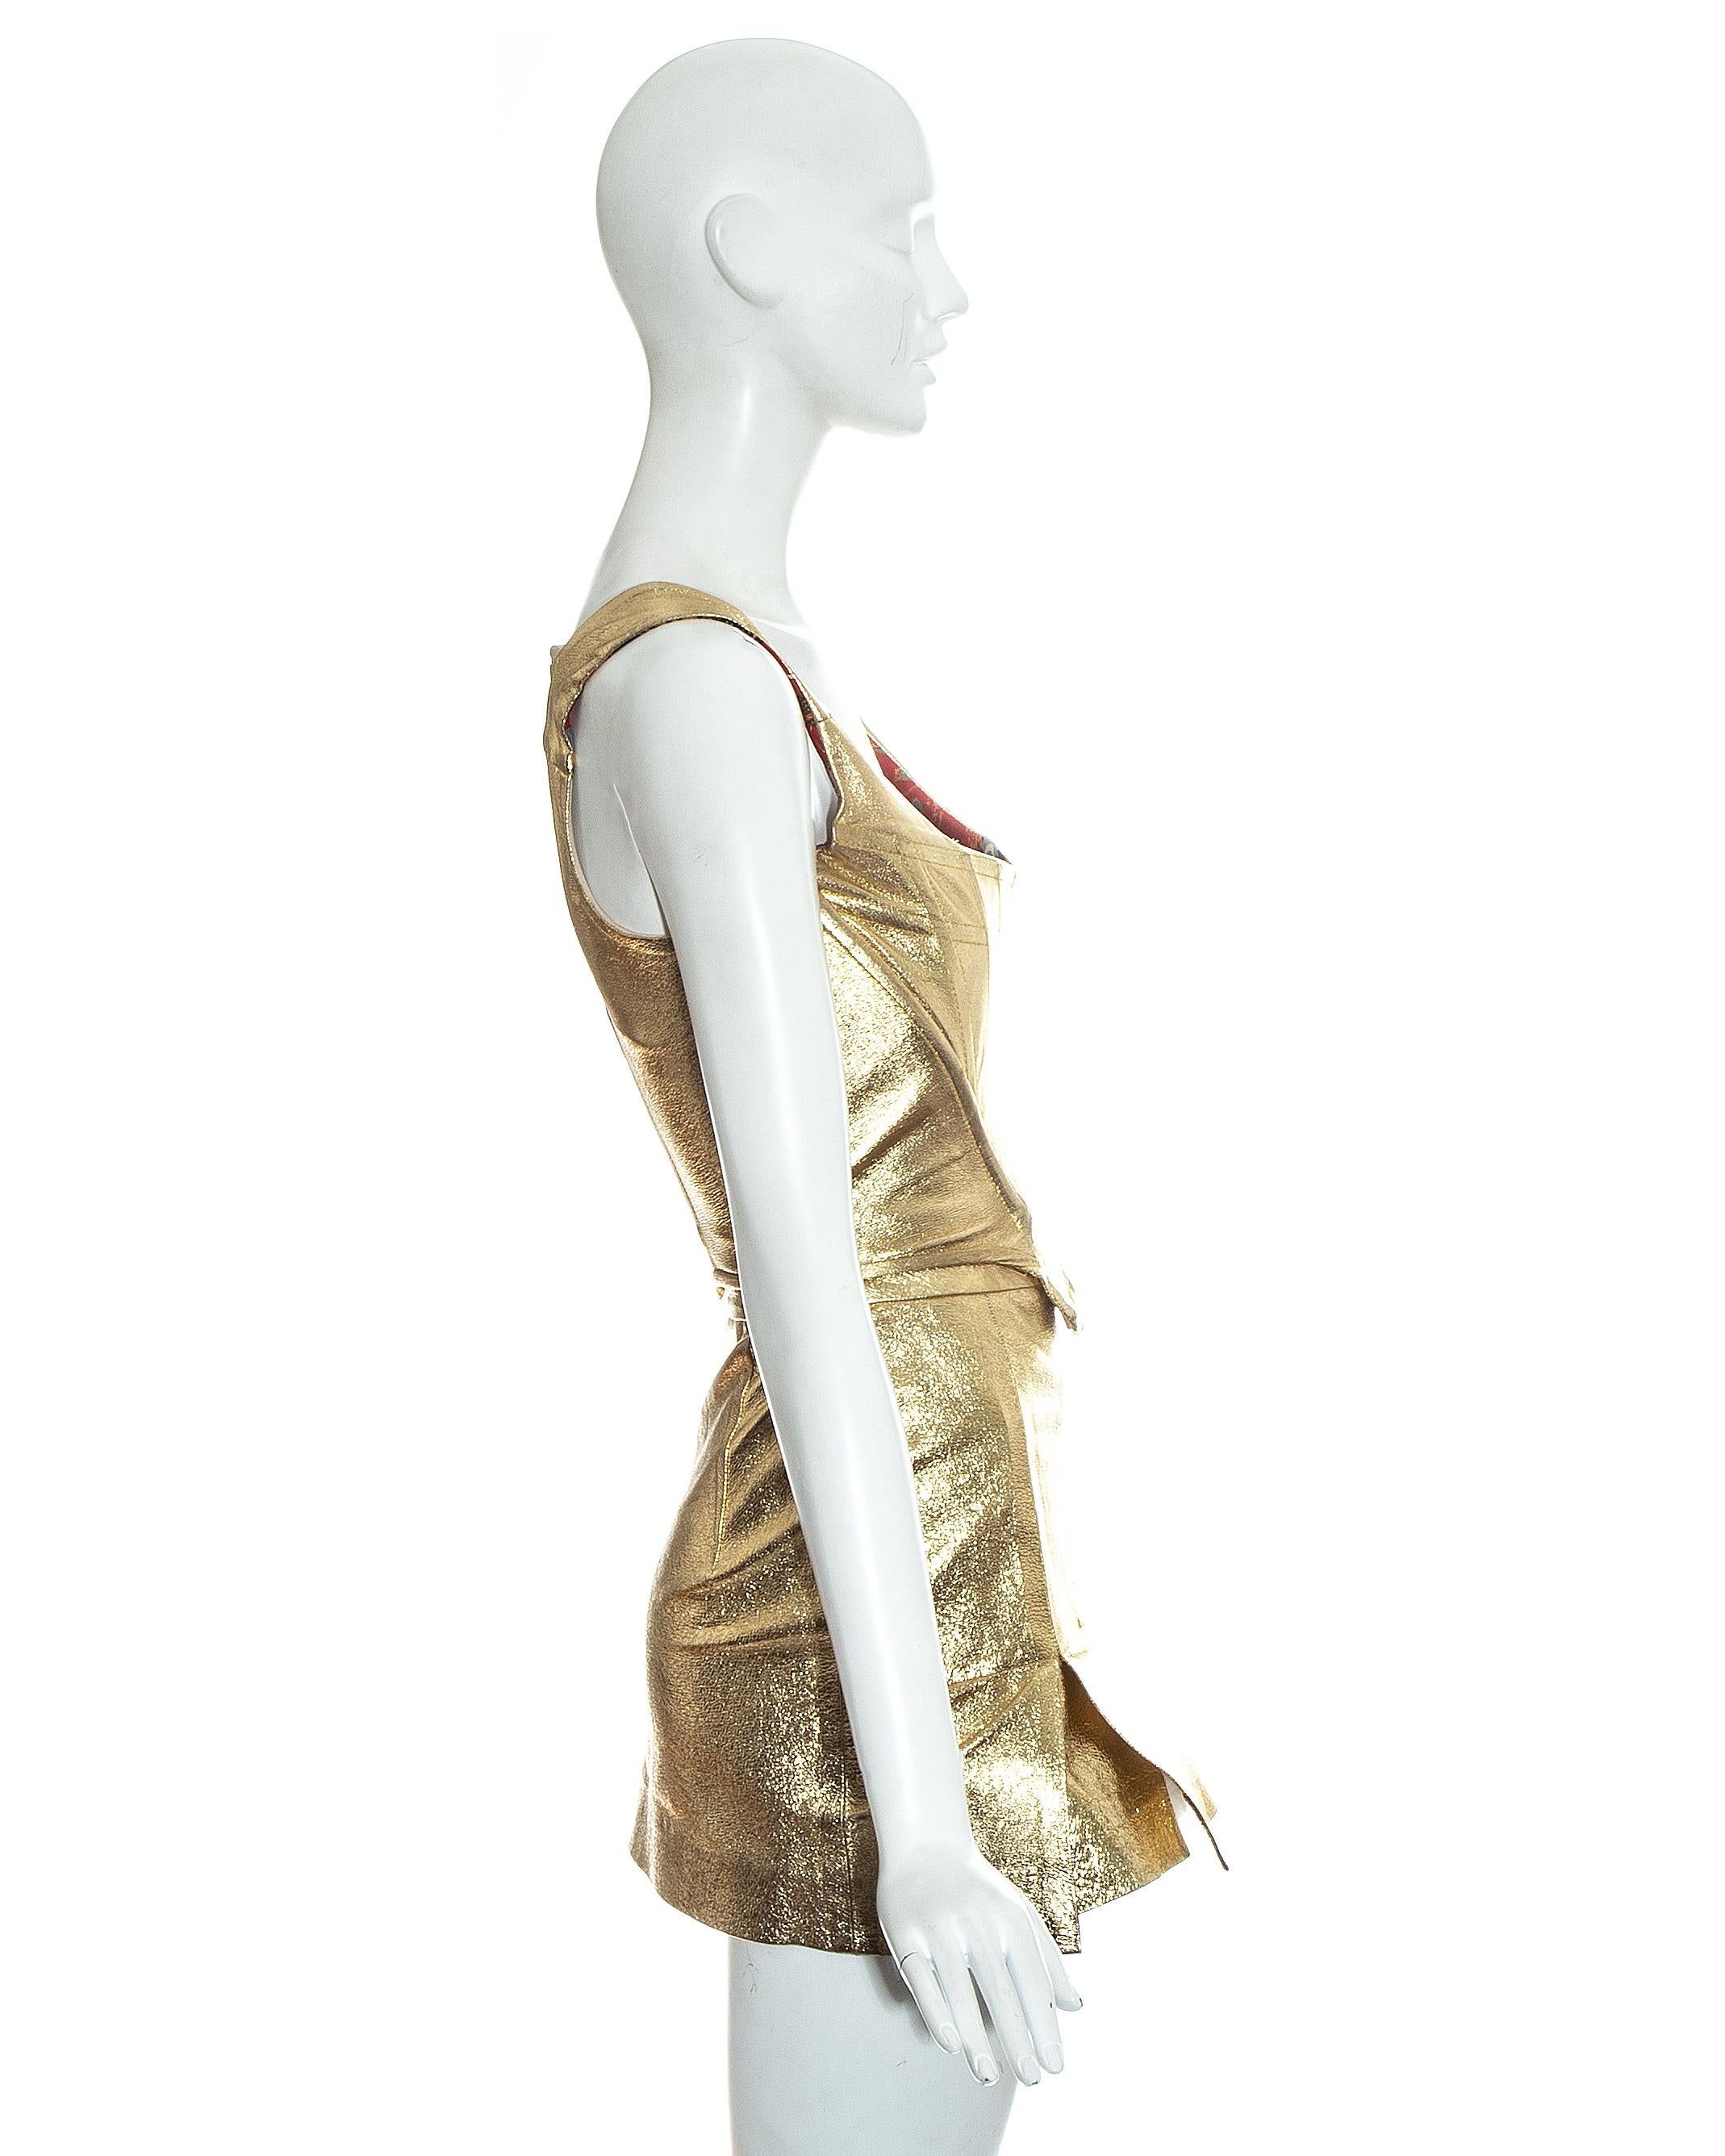 Women's Vivienne Westwood gold leather corset and mini skirt, 'Time Machine' ss 1988 For Sale